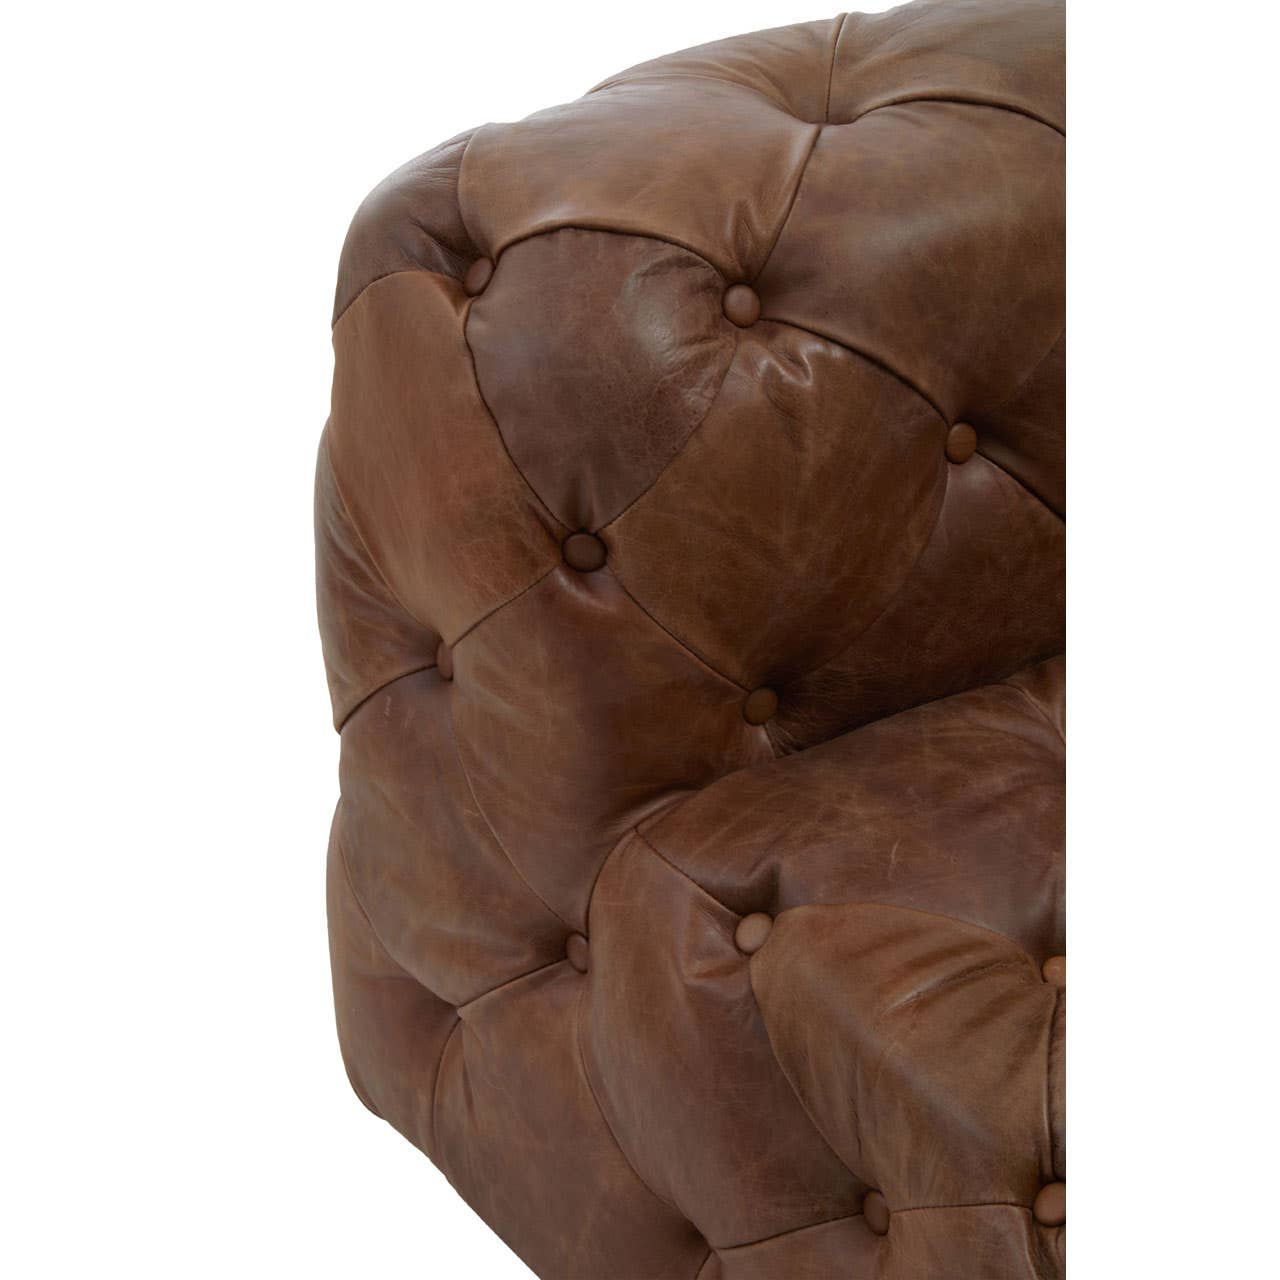 Bond St Fudge Brown Tufted & Buttoned Vintage Leather Occasional Chair